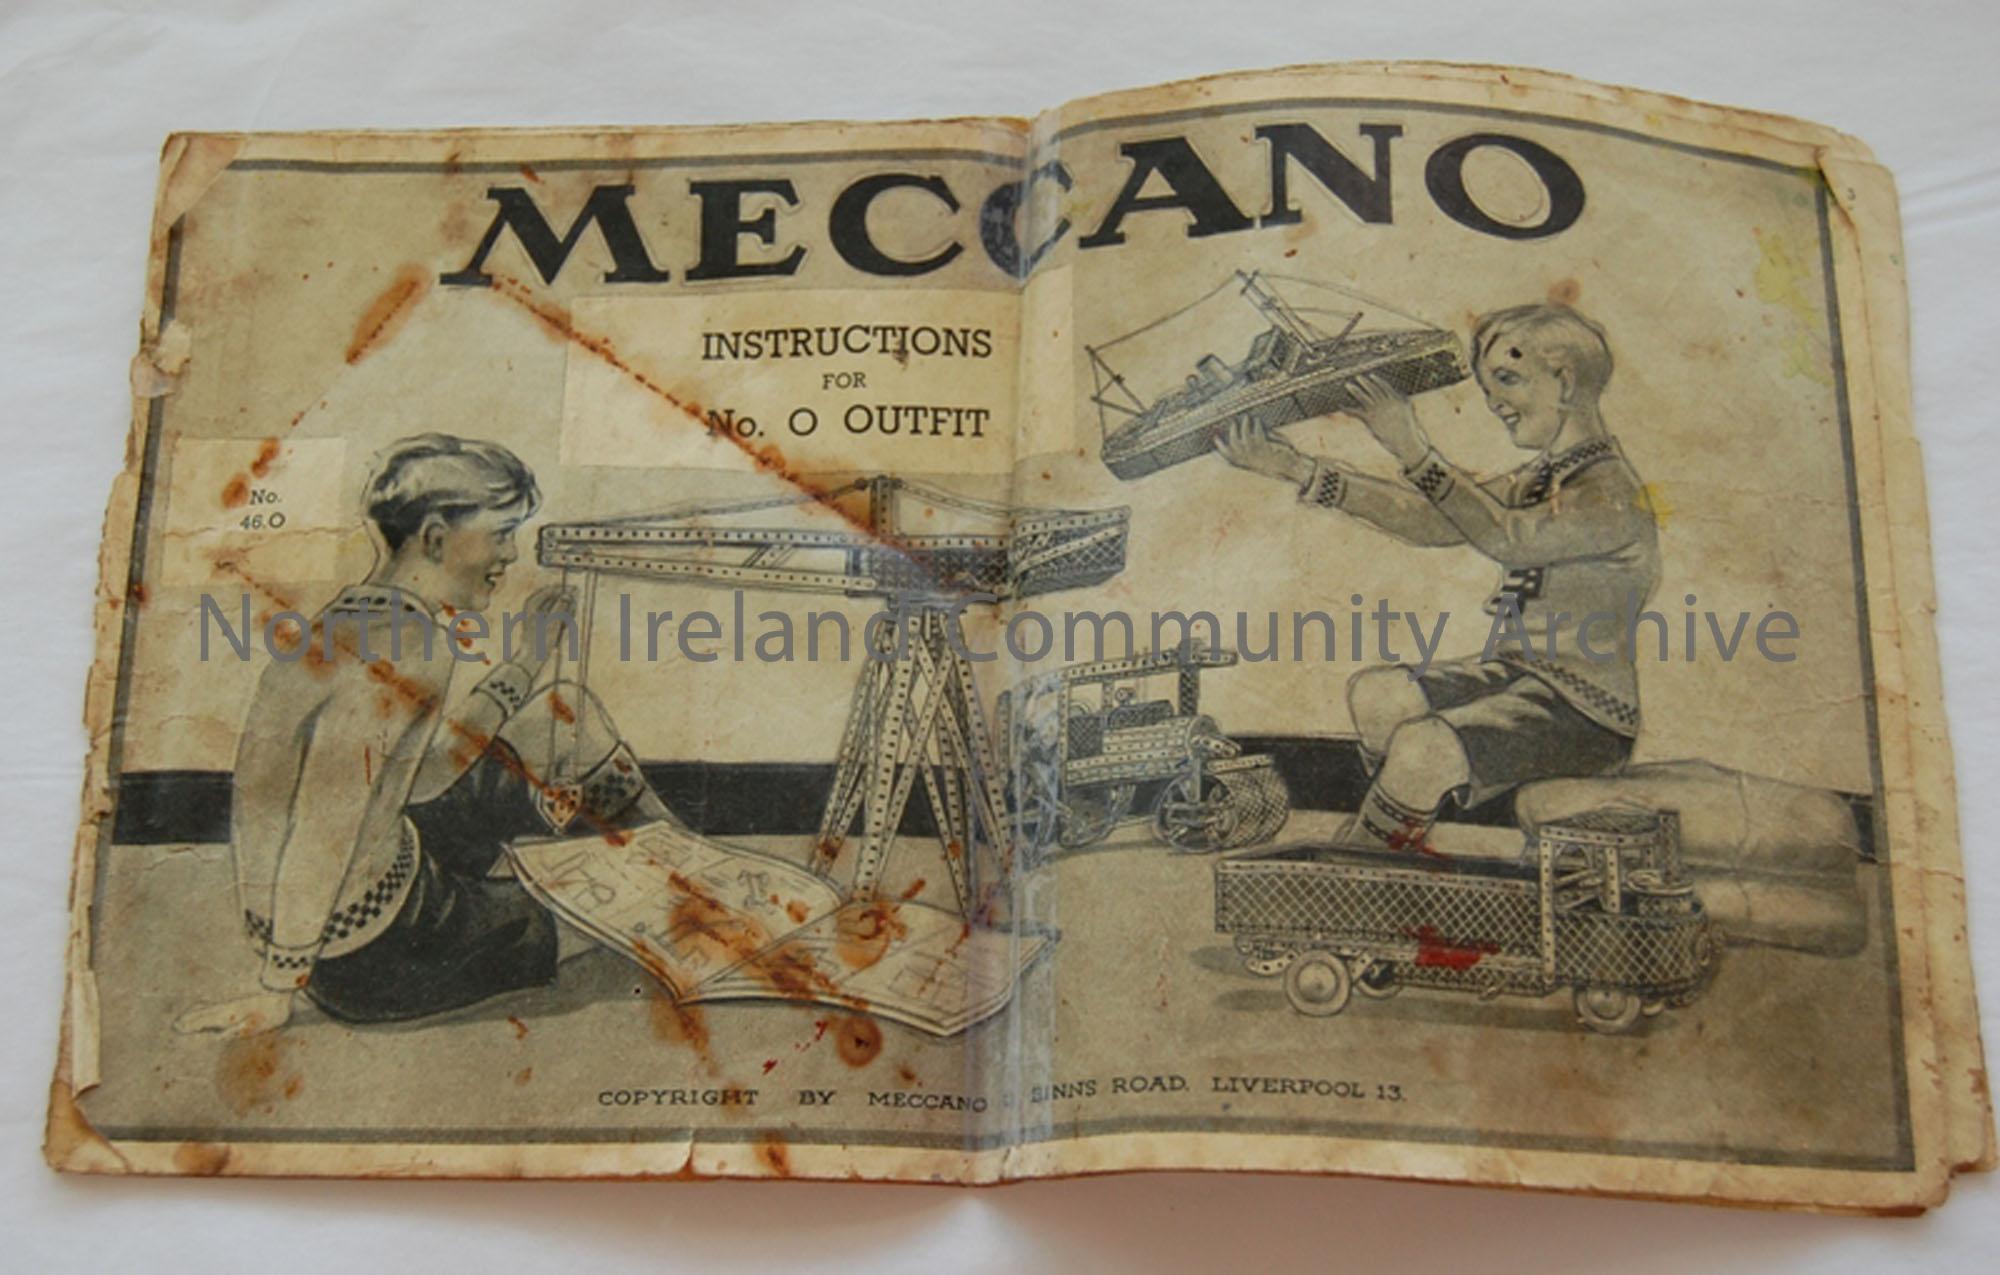 instruction booklet for meccano set c. 1950. Also includes handwritten parts list complied by Wallace McNaul aged 14